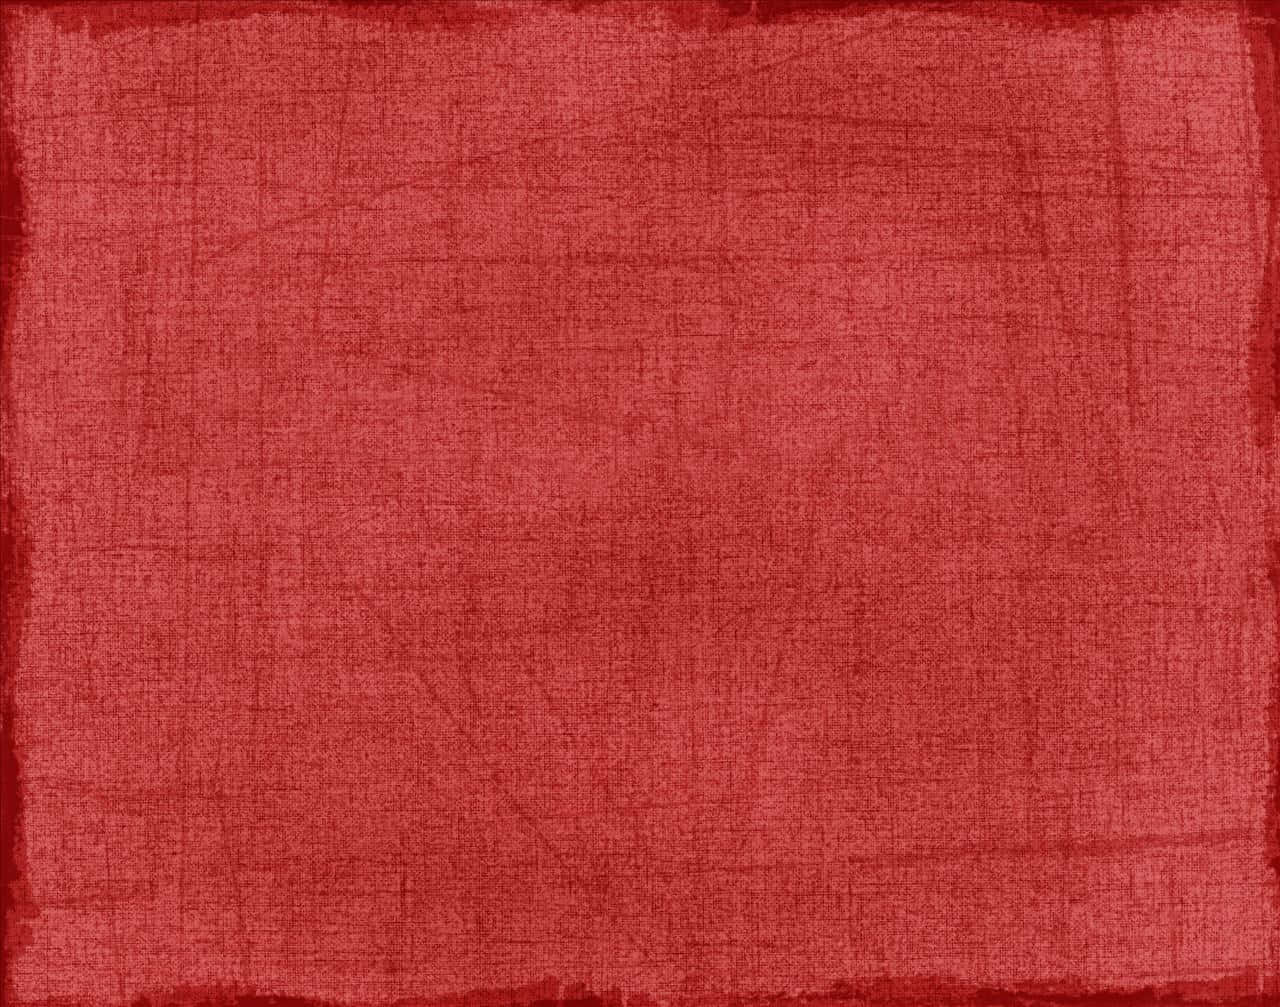 red fabric background with a square frame